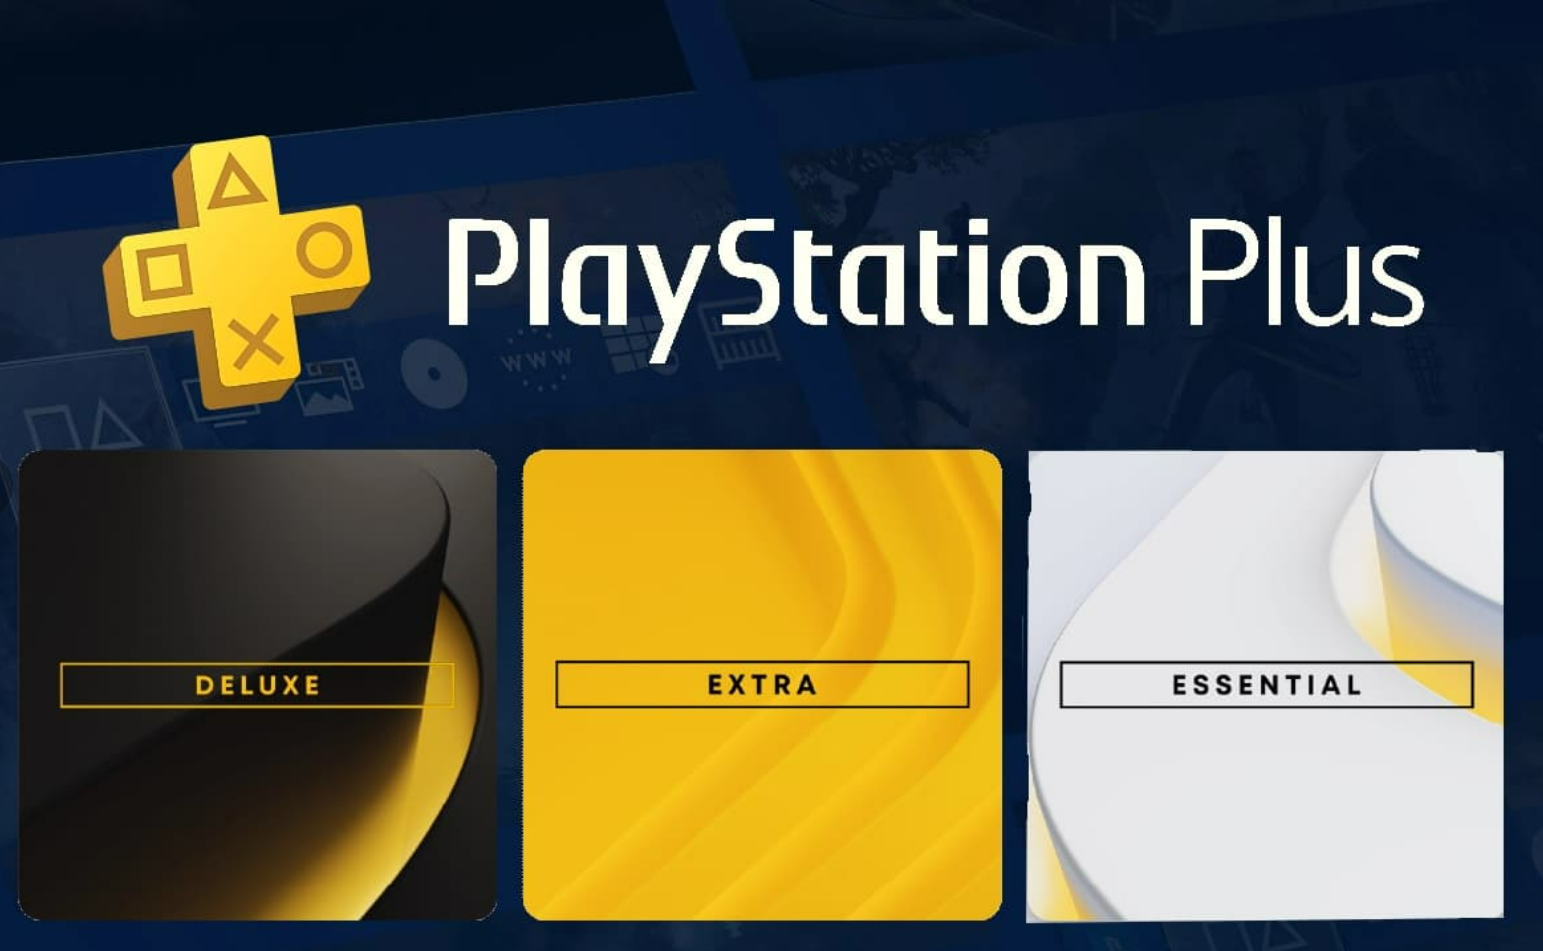 Playstation turkey ps plus. Подписка PS Plus Essential Extra. PLAYSTATION Plus Deluxe 12. Deluxe Essential PS Plus. PS Plus Deluxe Essential Extra 12 месяцев.